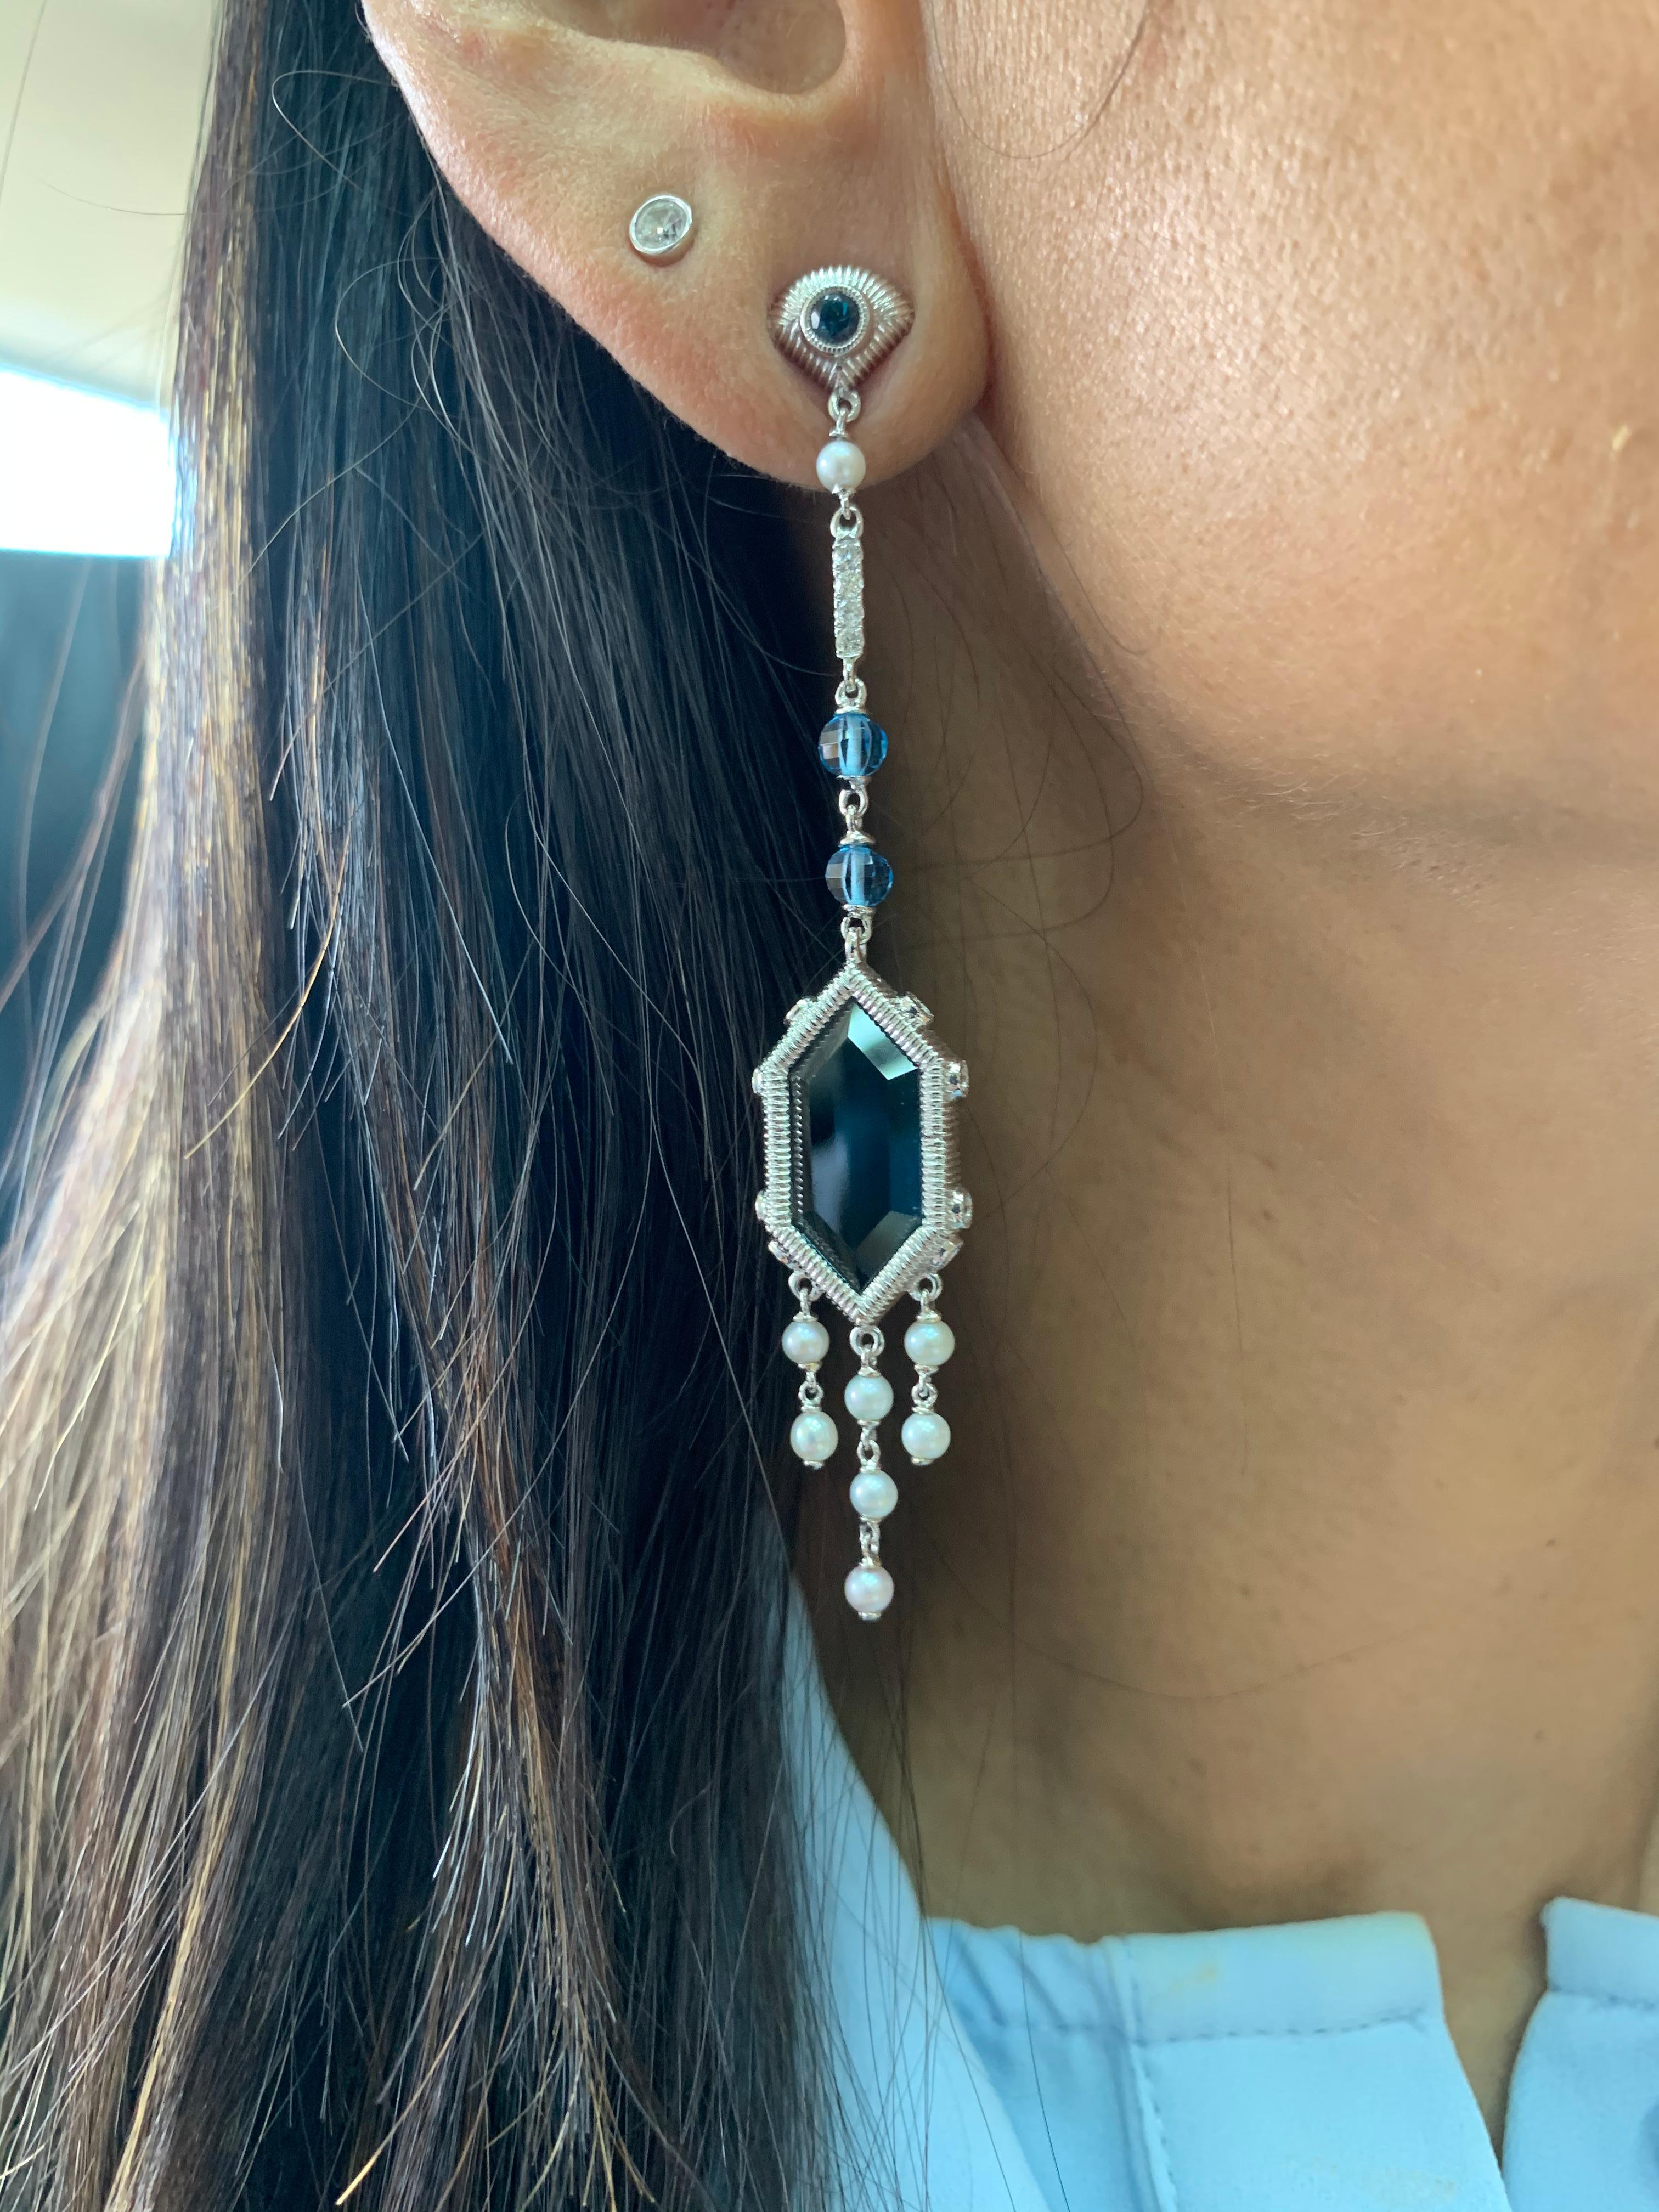 Sunita Nahata presents a series of 'Healing Hexagon' Earrings made to wear everyday and bring harmony to the mind, body and soul. 

This is a luxurious London blue topaz earring and this gemstone is particularly known to bring powerful energies to